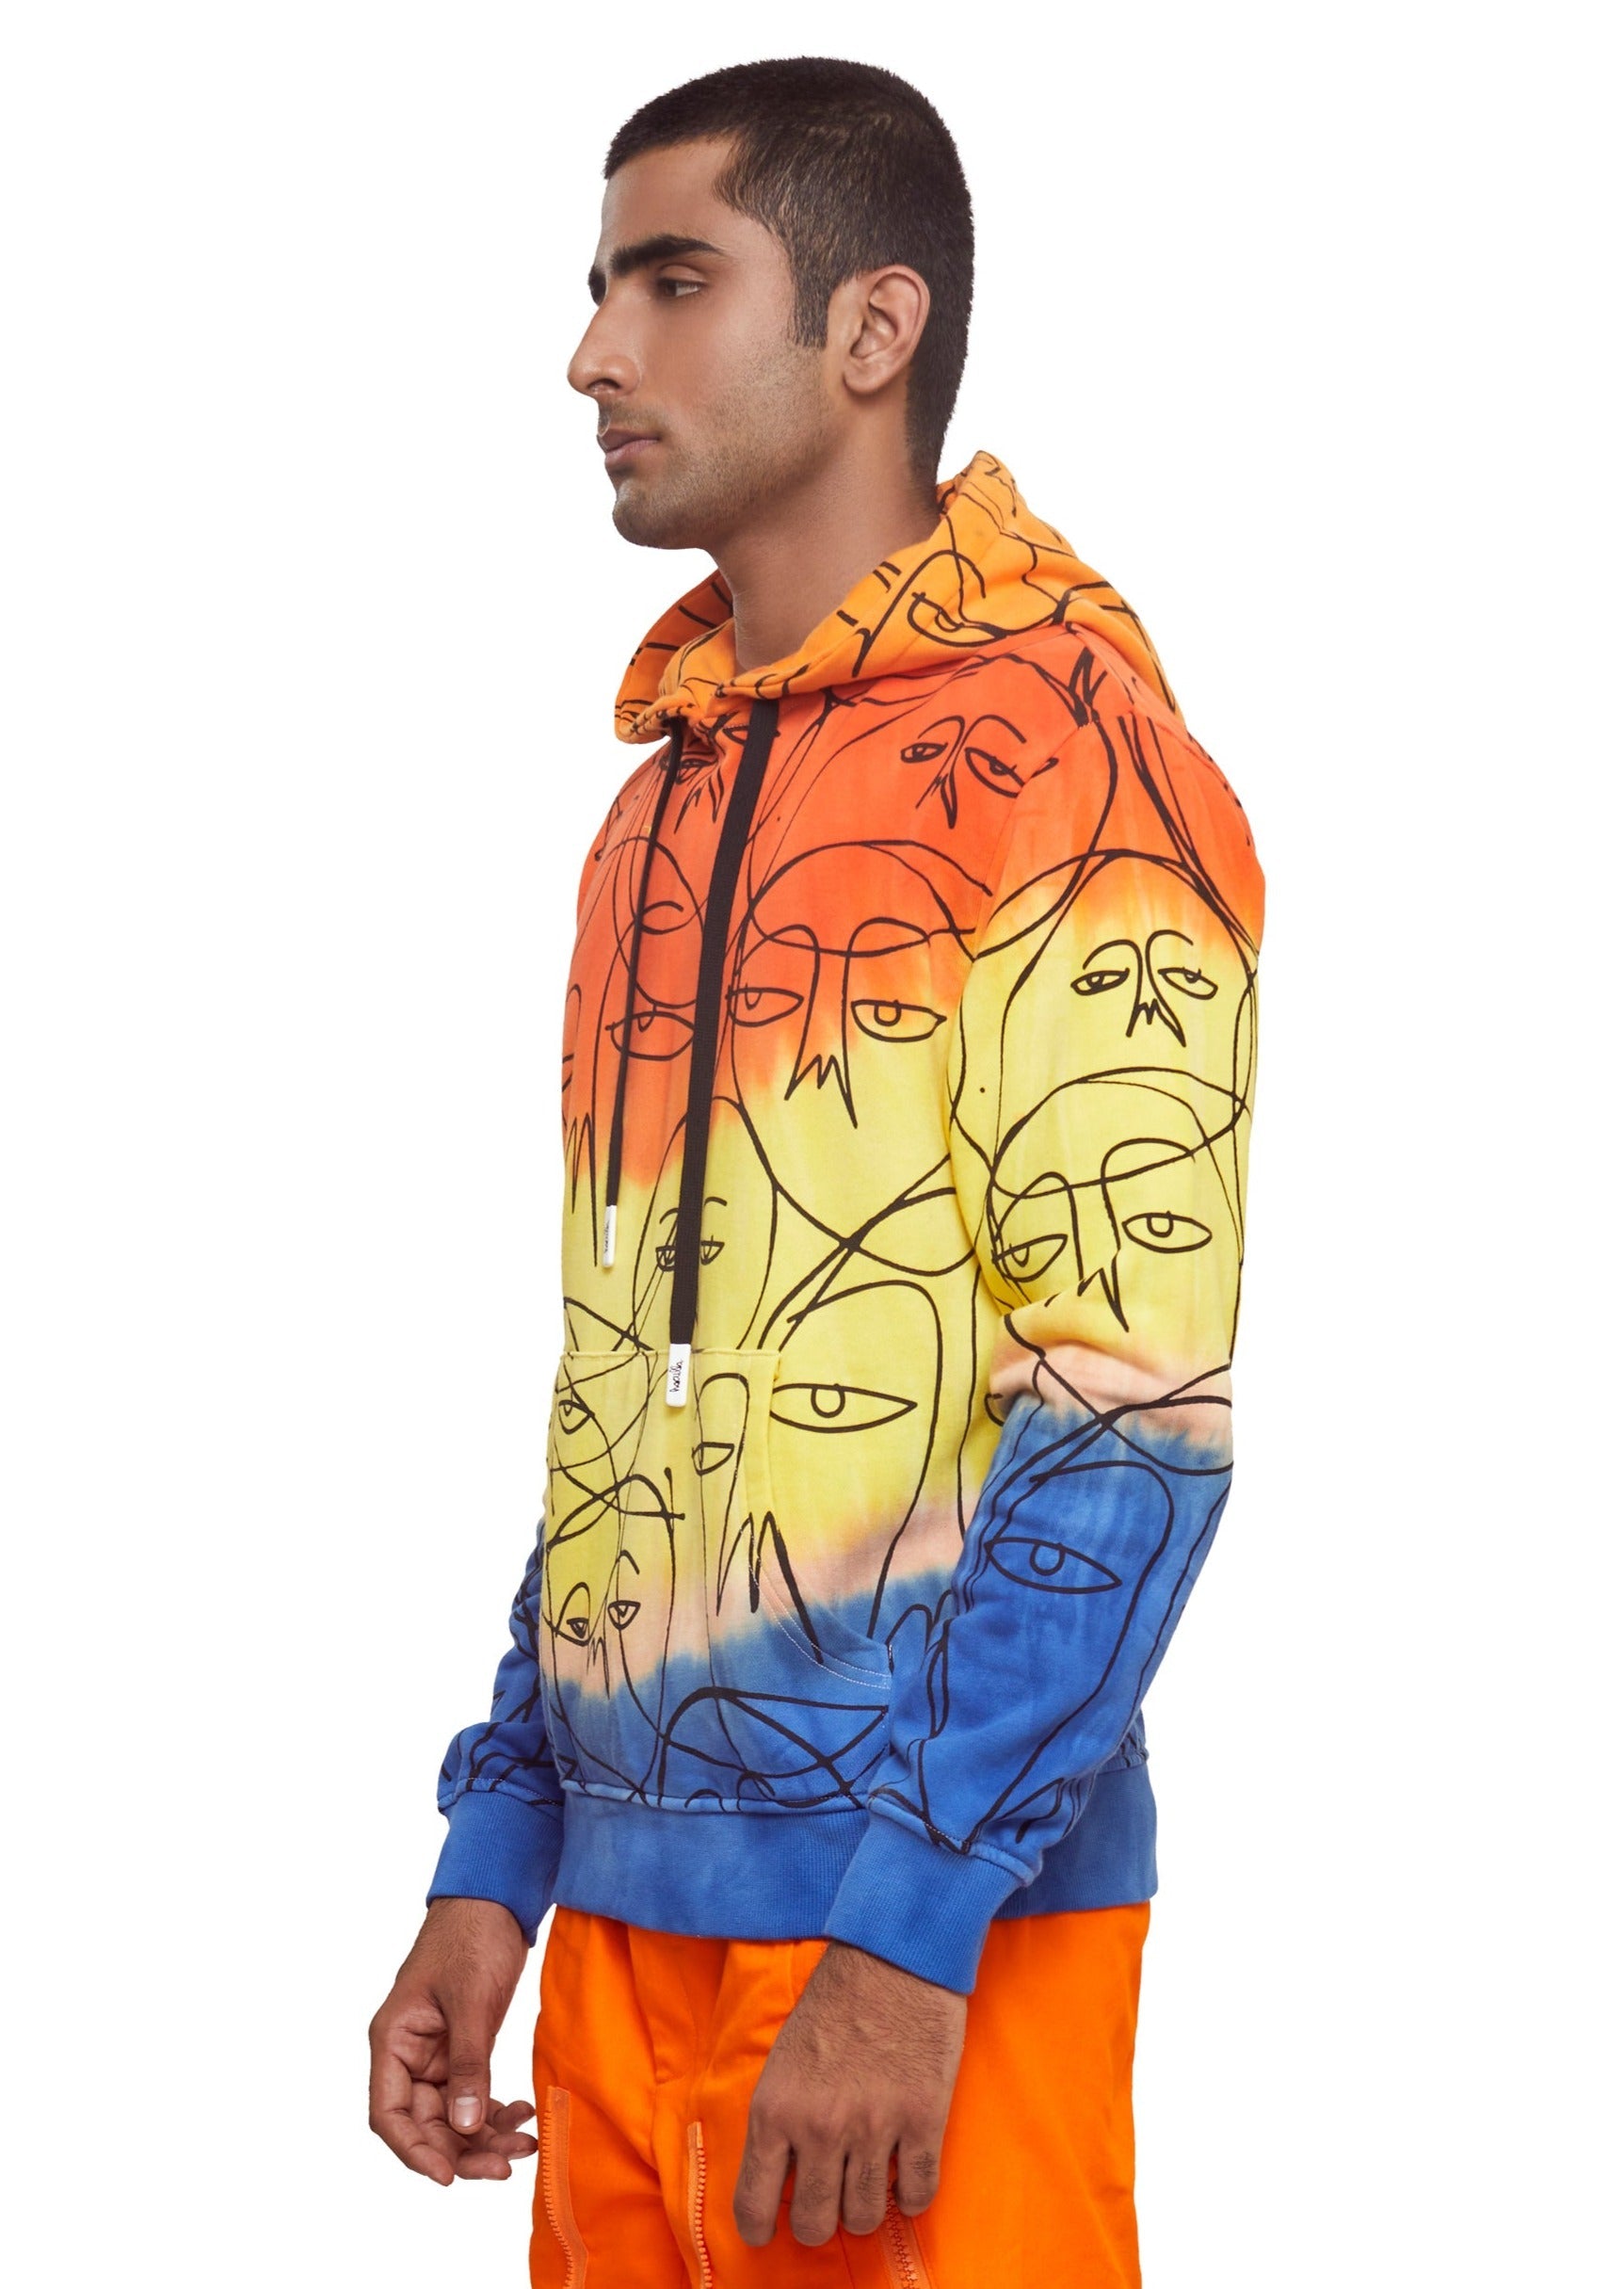 Orange, yellow and blue Cotton "One of a Kind" all-over printed, 5-color dip-dyed, over-sized pull-over hoodie from the brand Haculla